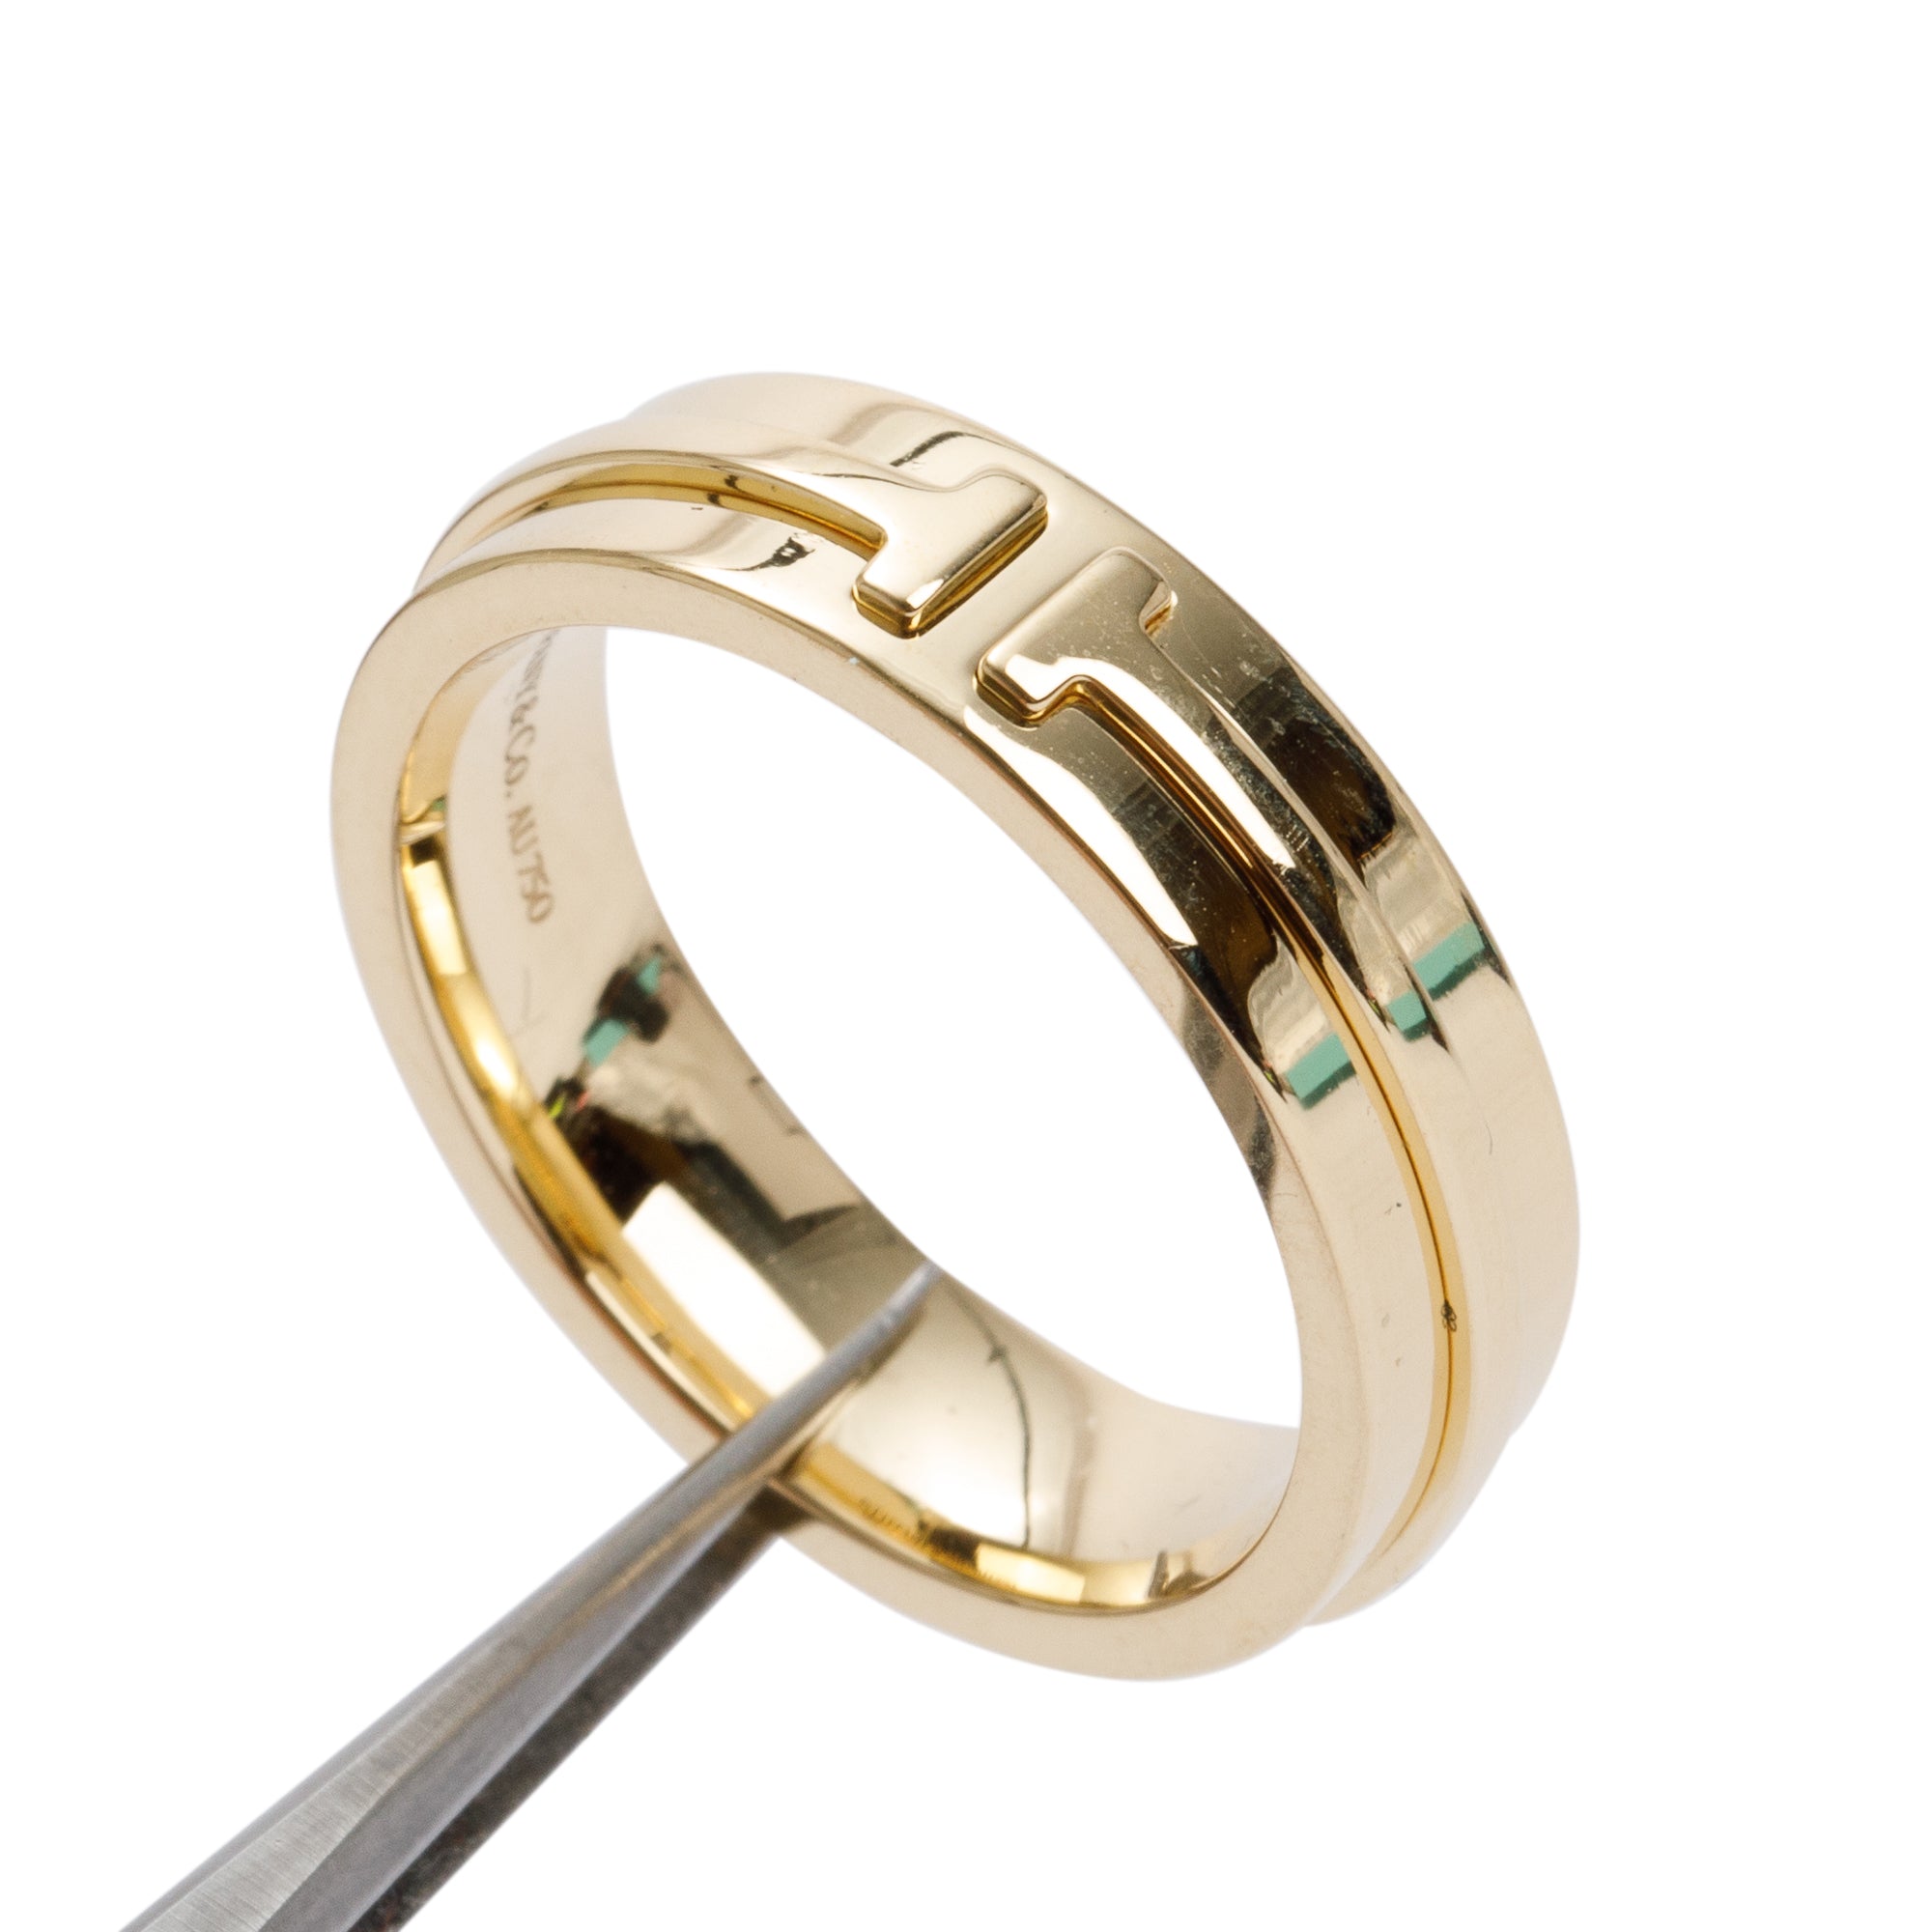 A wedding ring for two, the new trend by Tiffany | Vogue France